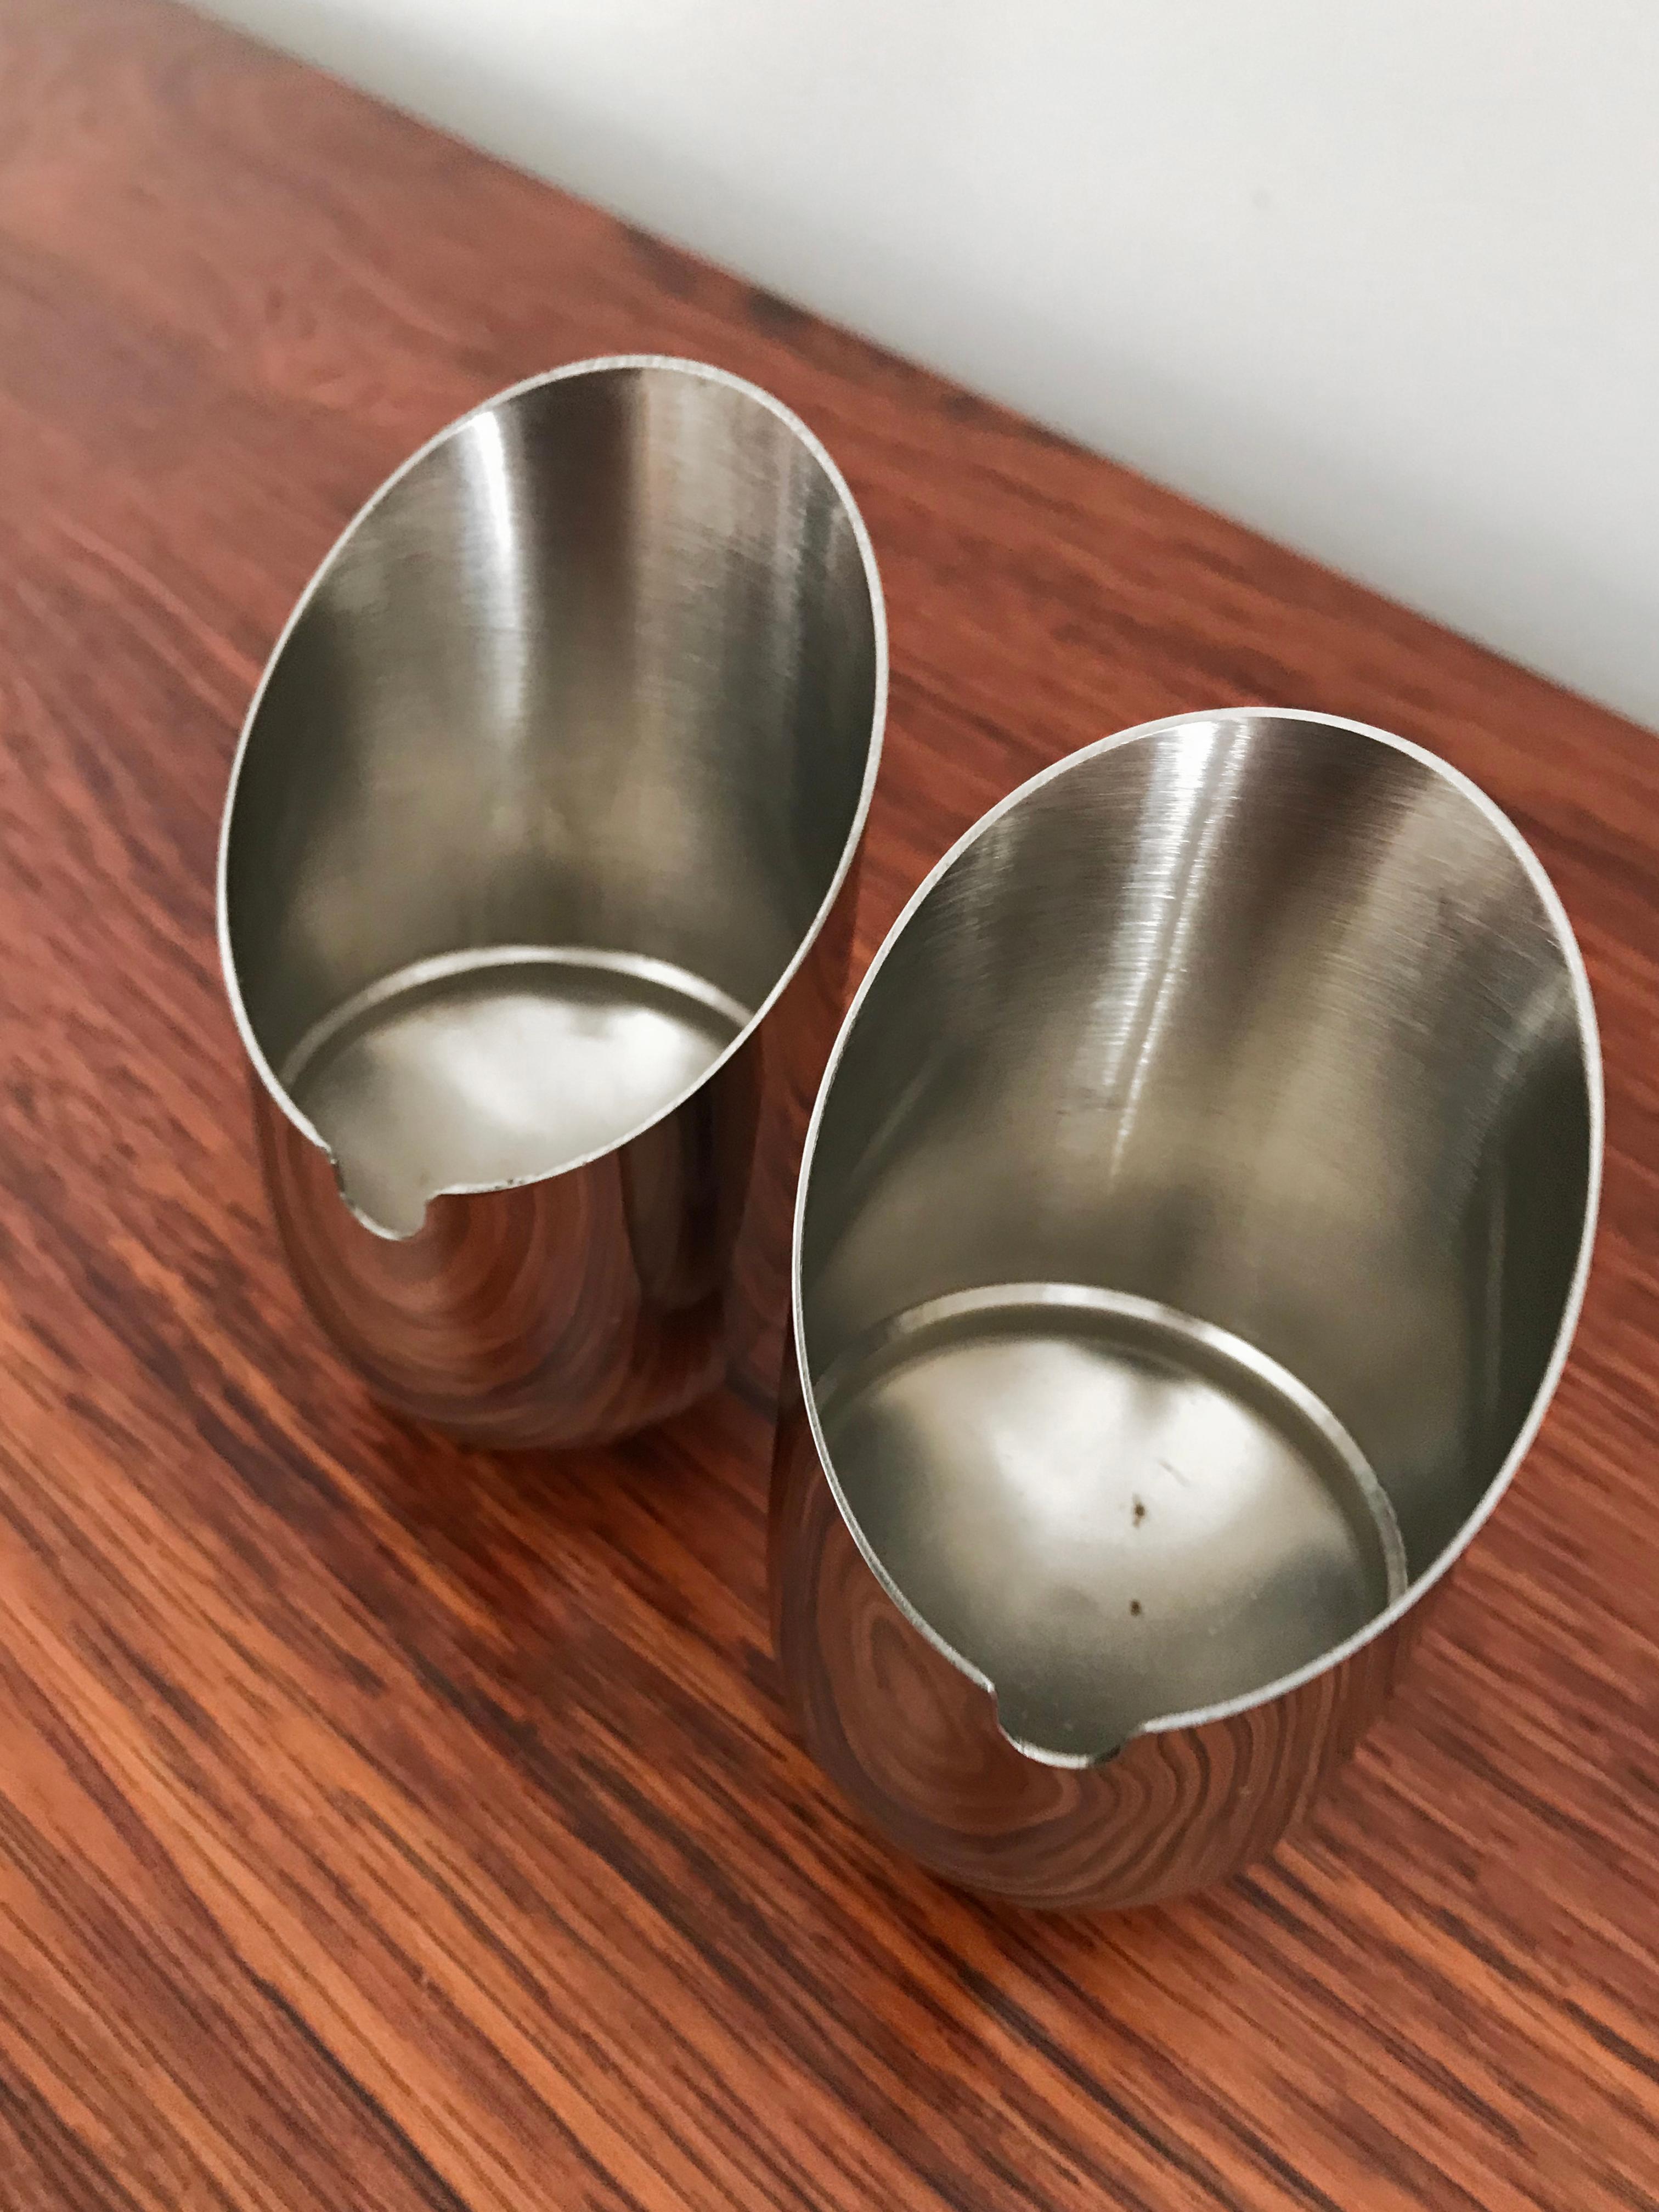 Stainless Steel Birillo Italian Steel Ashtrays by E. Didone for Valenti, 1970 For Sale